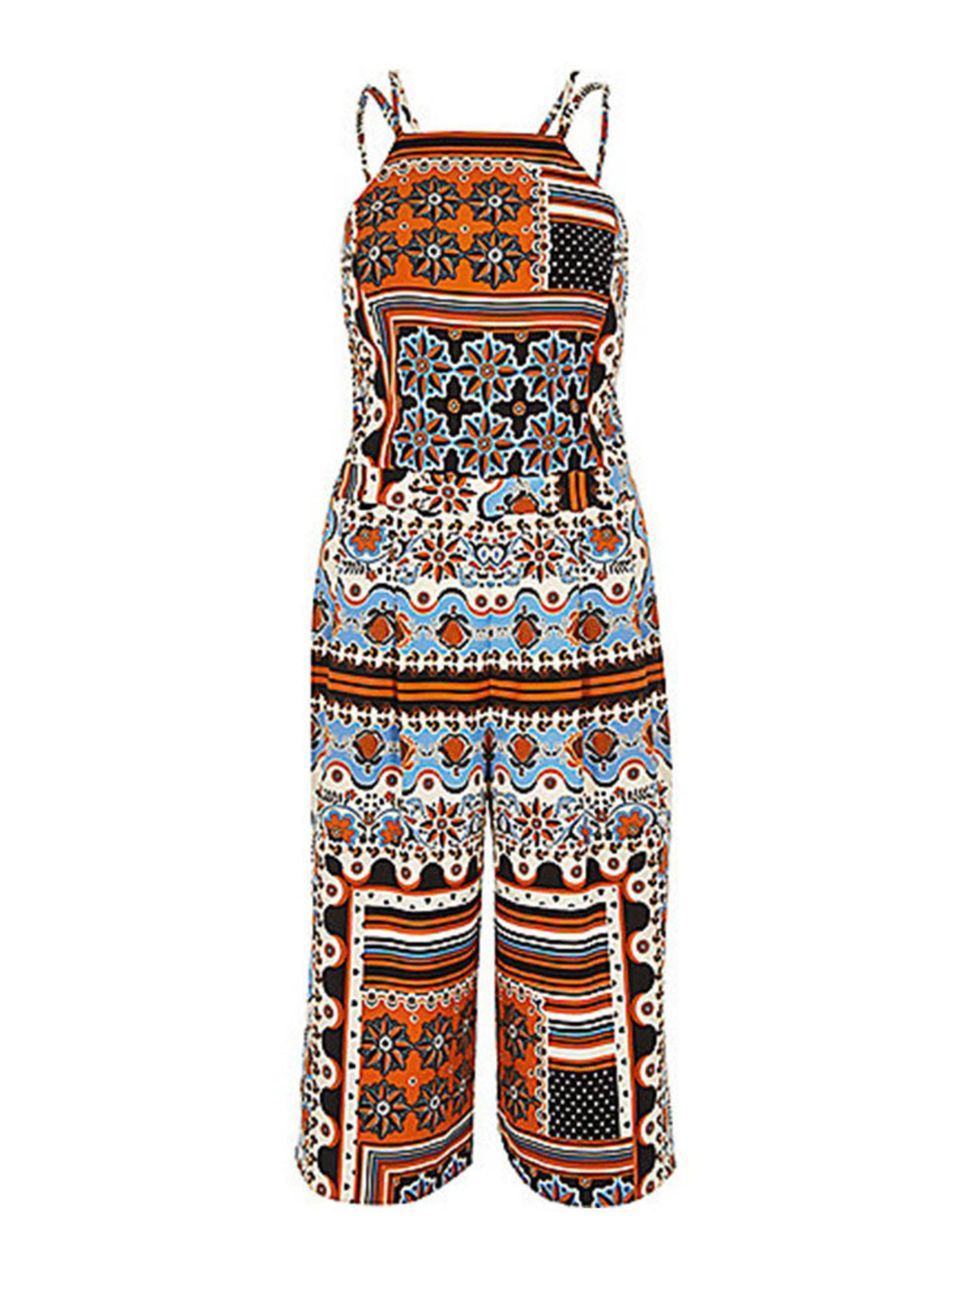 <p>Aztec meets mosaic for this summer staple, Market and Retail Editor Harriet Stewart will wear with gladiator sandals from day to night. </p>

<p> </p>

<p><a href="http://www.riverisland.com/women/playsuits--jumpsuits/jumpsuits/orange-tile-print-strapp